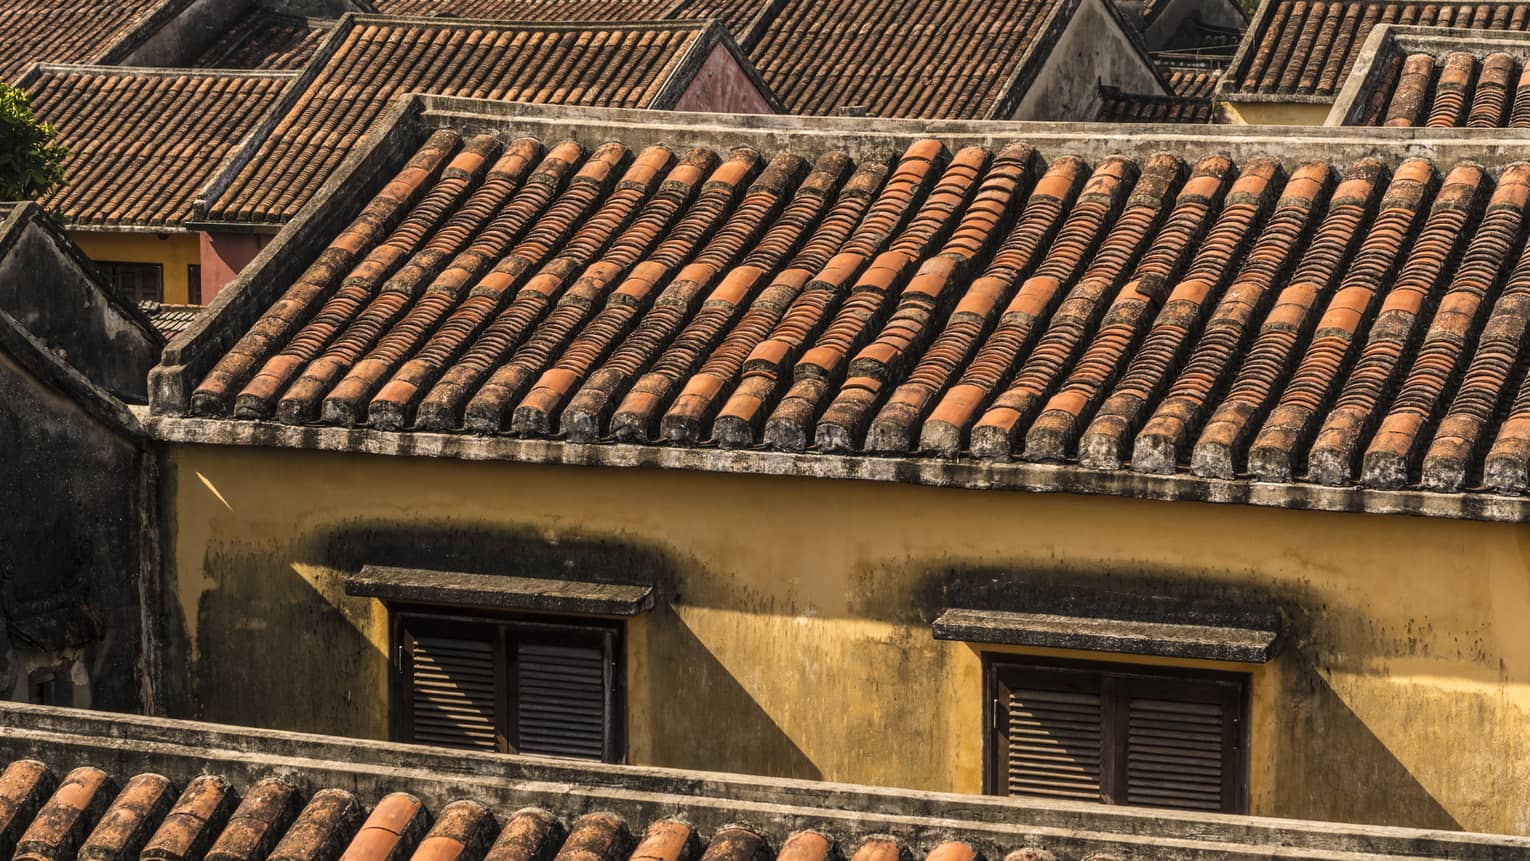 An aerial view of terracotta roofs in Hoi, Viet Nam